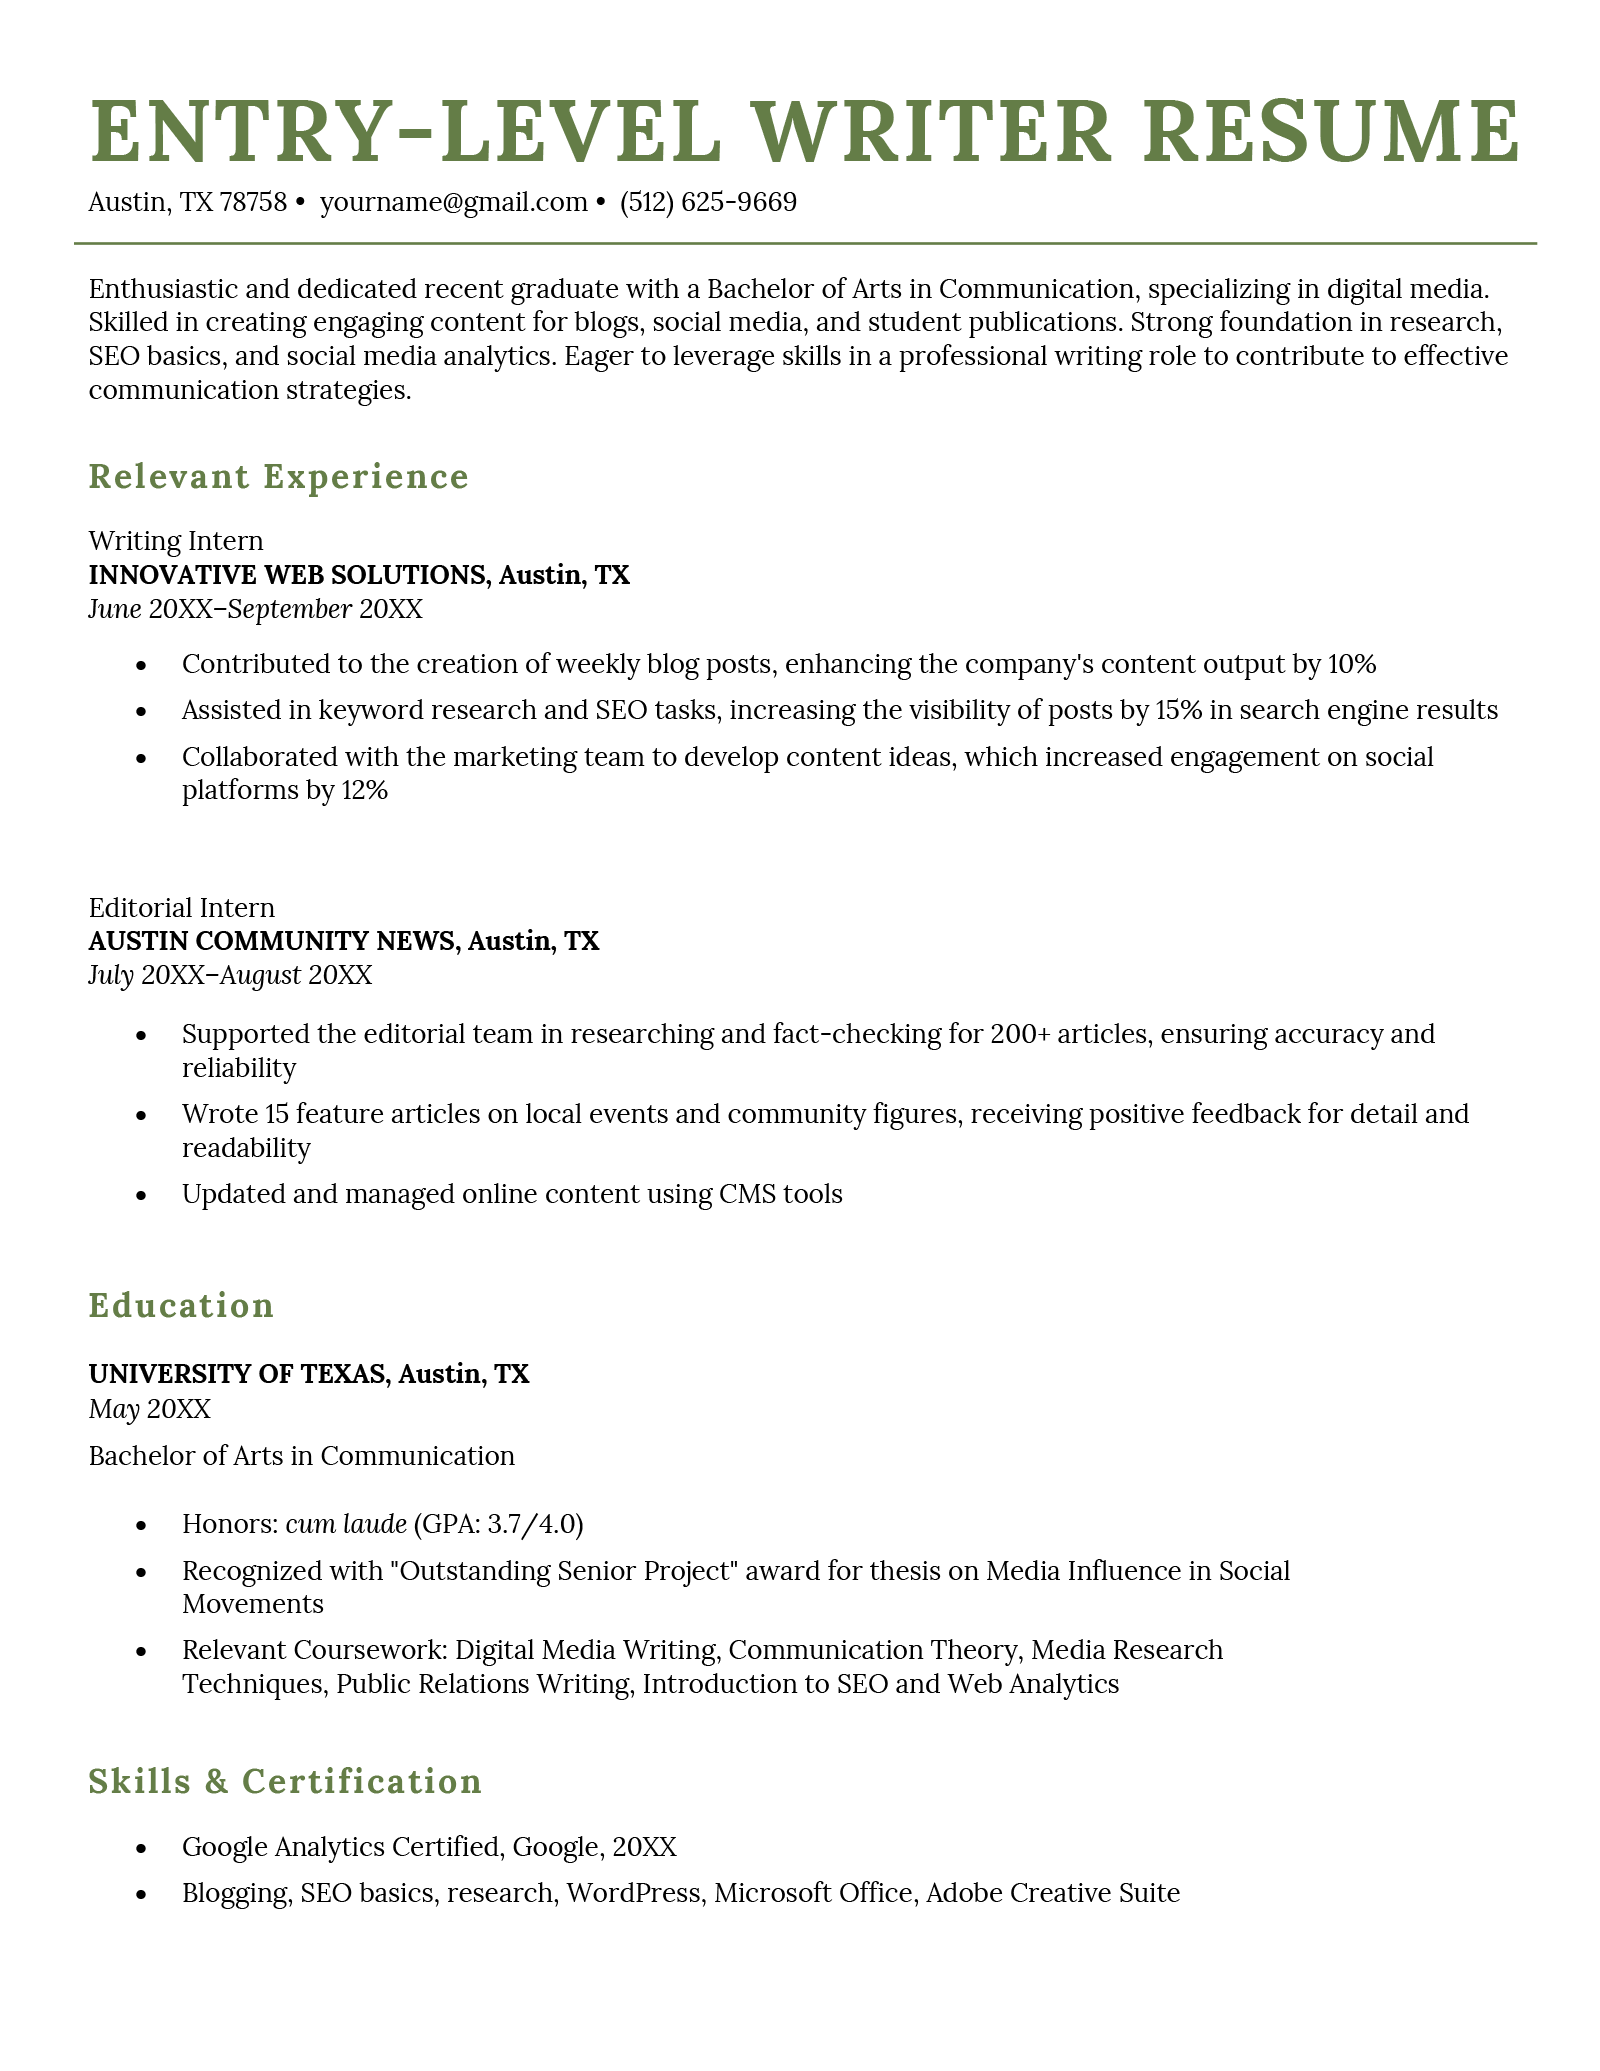 An entry-level writer resume example in a template with green header text